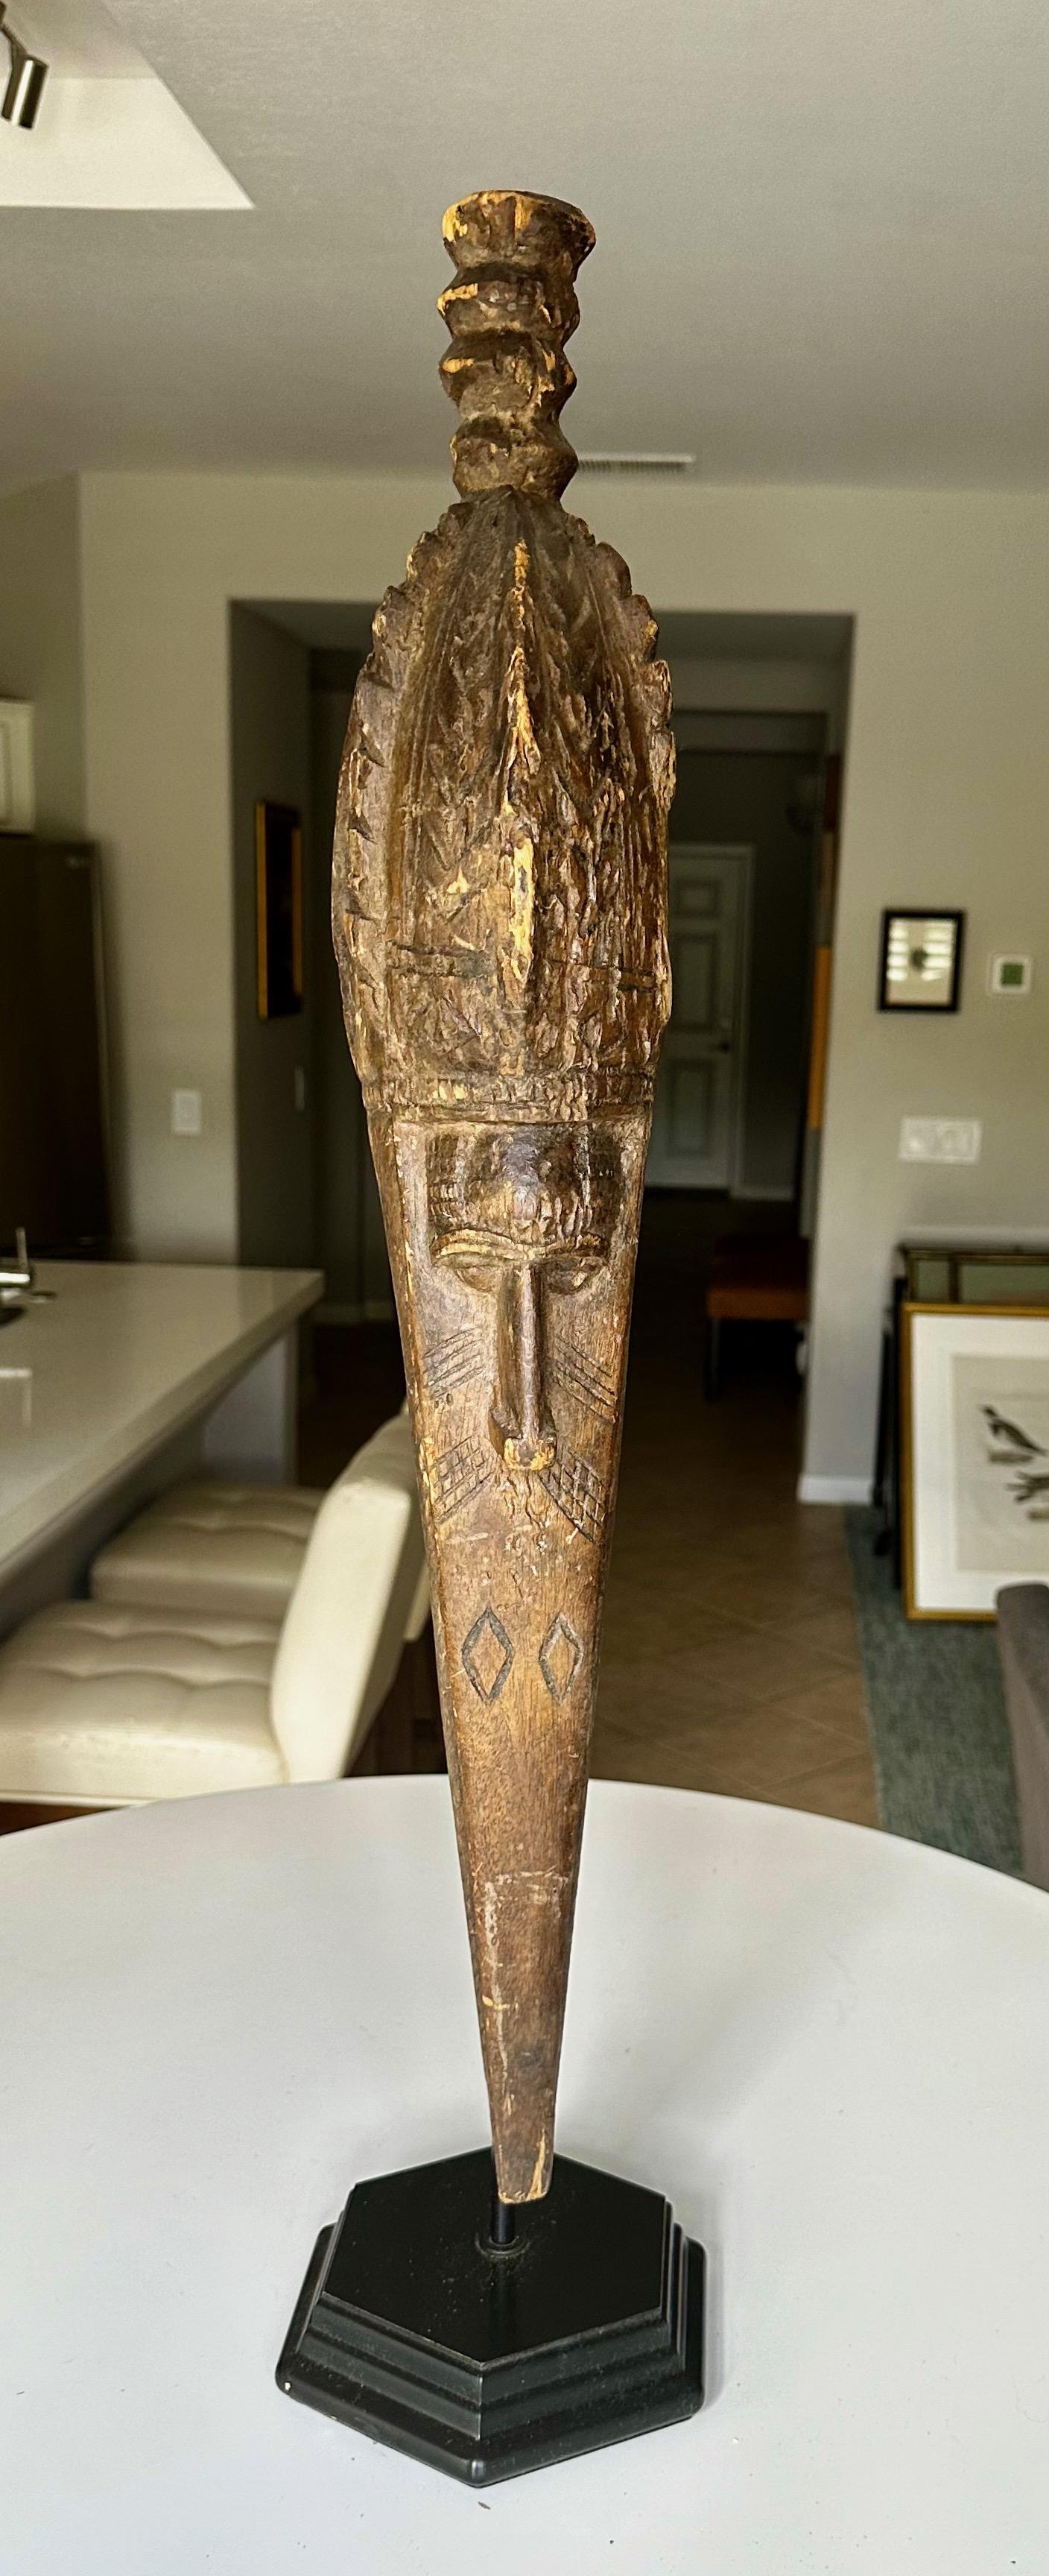 An antique Baga anok or elek carved wood mask sculpture, with bird and human face form elements, made by Baga people (Guinea West Africa). Features long and pointed bird beak, incised carvings, and carved human face. The sculpture sits on a newer